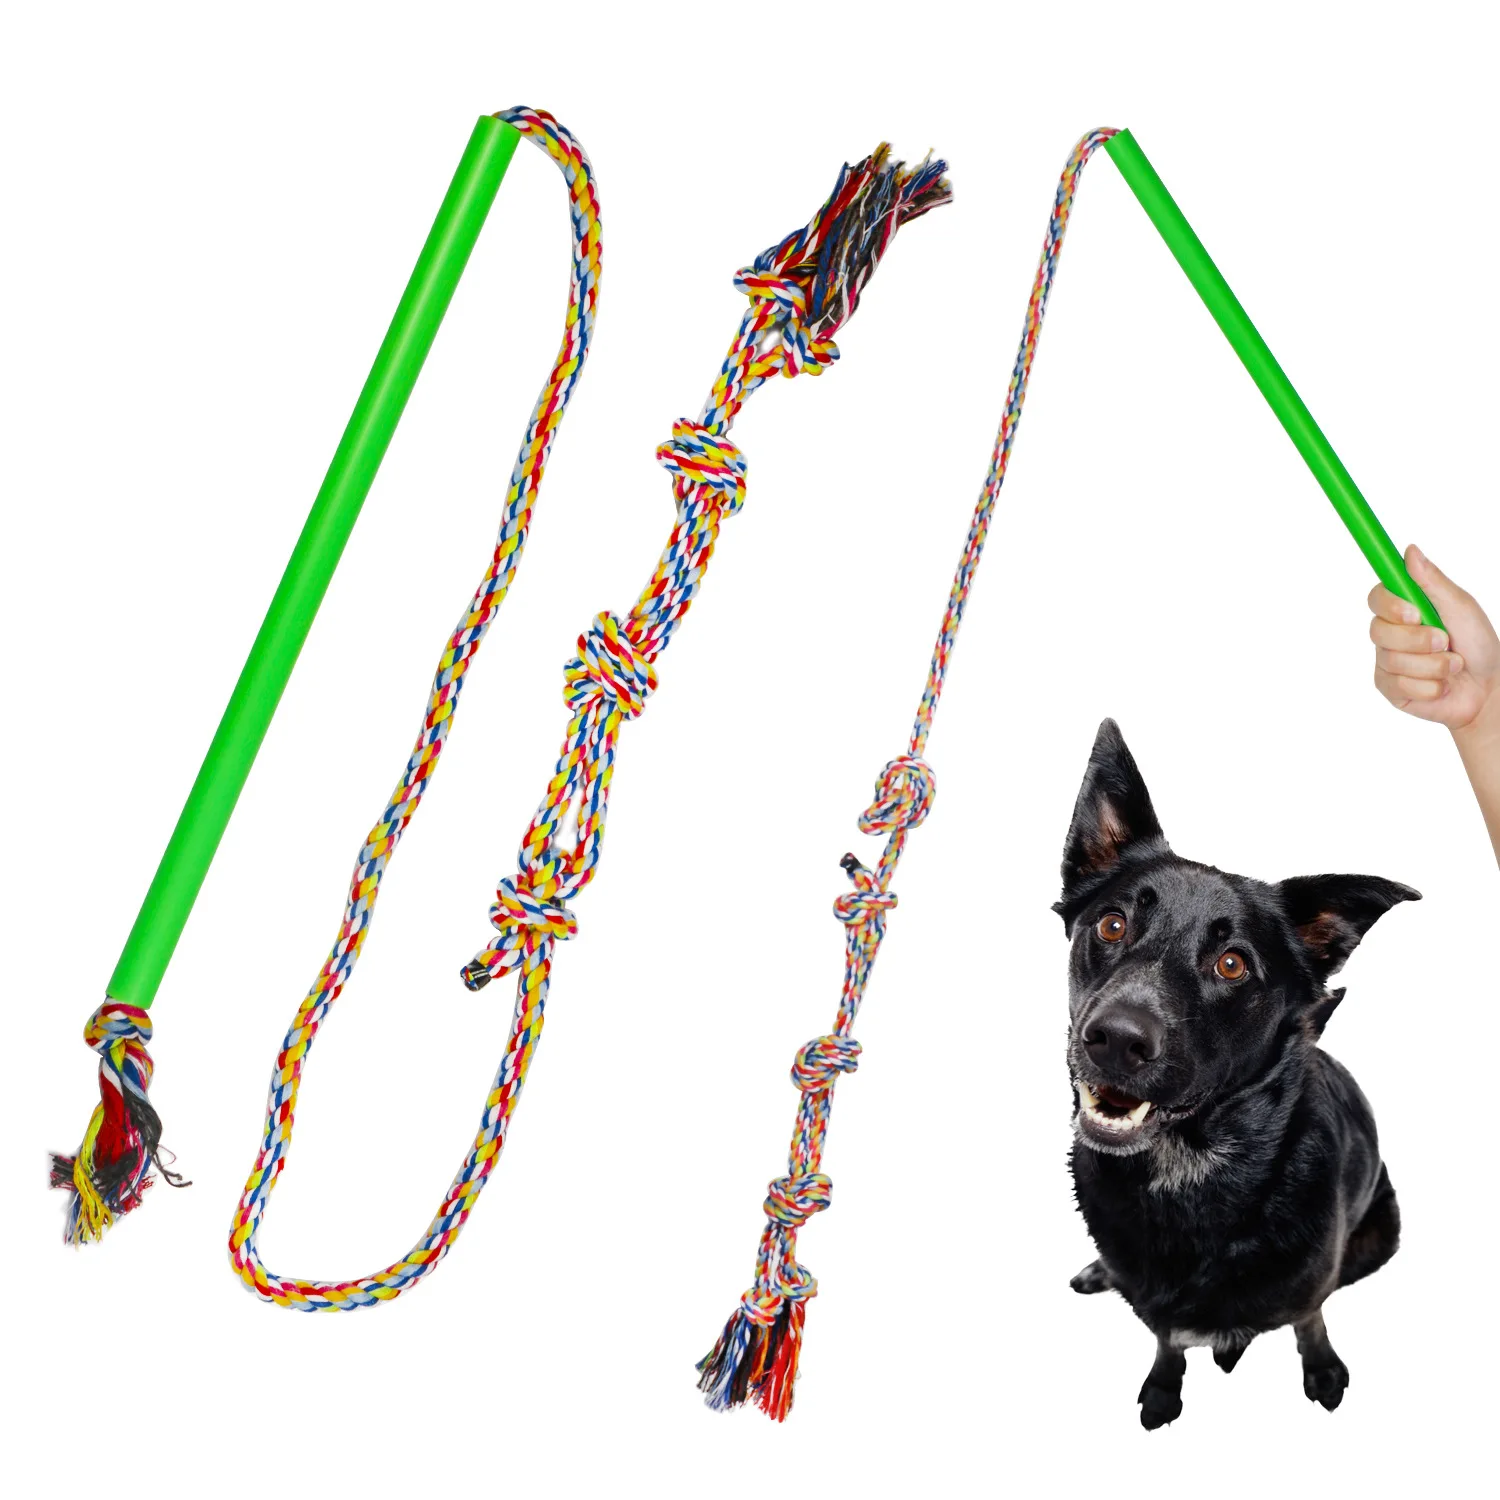 Dog Flirt Pole Toy, Interactive Teaser Wand For Dogs Tug Of War And Outdoor  Exercise, Tether Lure Toy With Chewing Rope To Chasing And Training For, Dog Chasing Rope